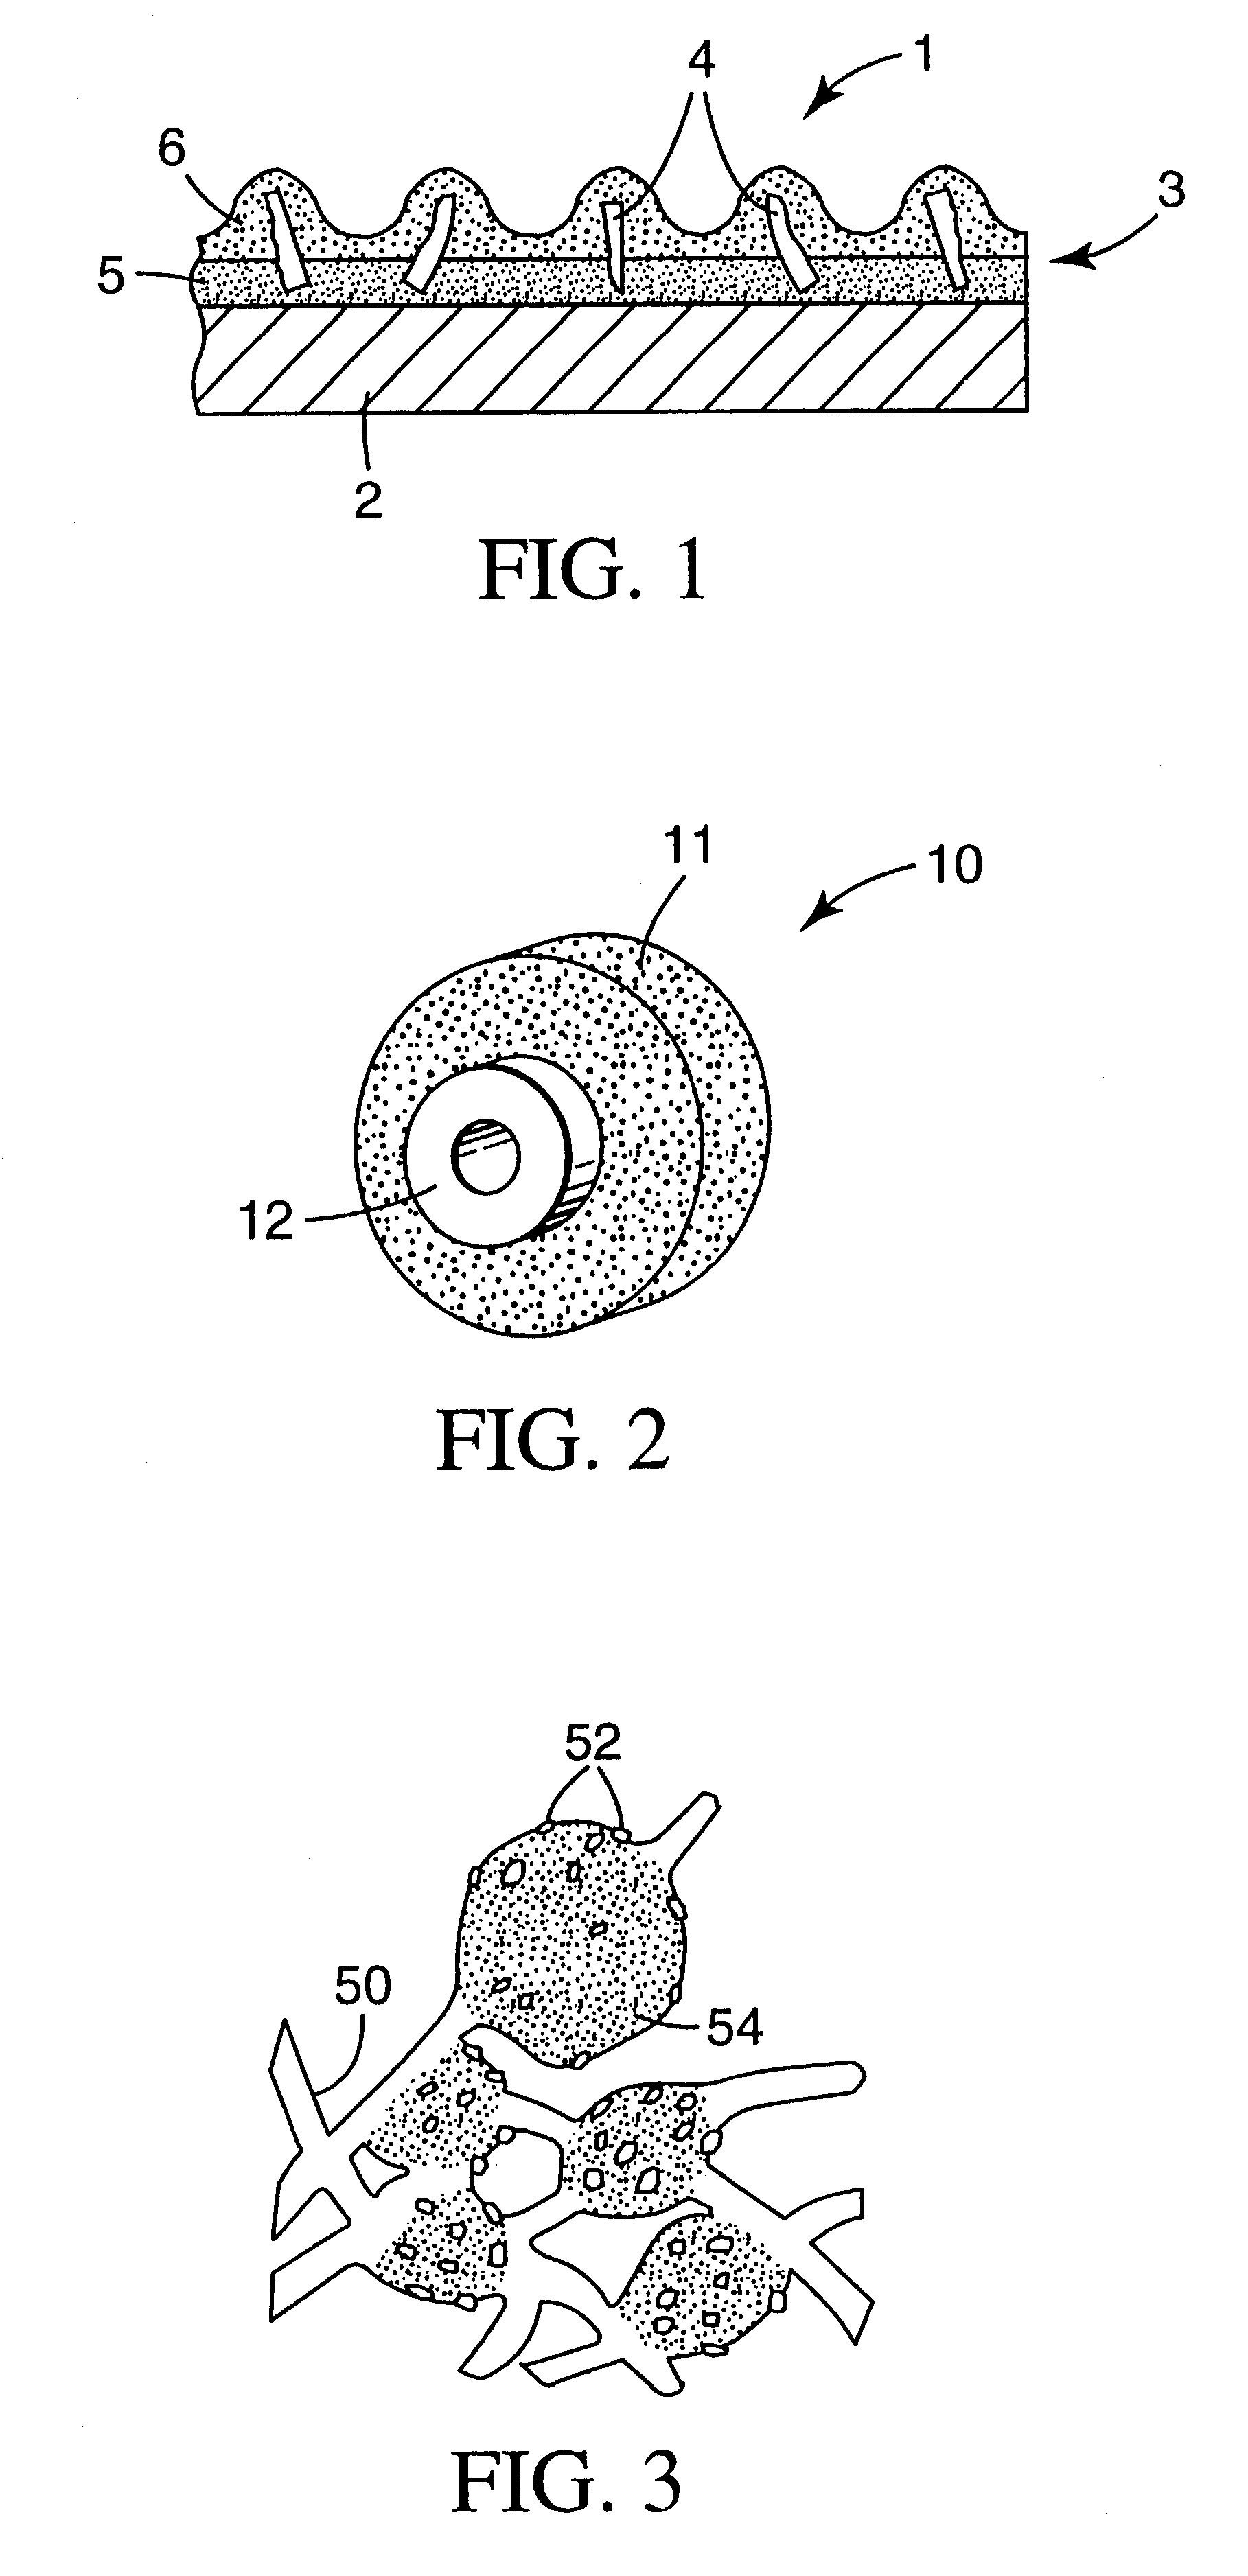 Abrasive grain, abrasive articles, and methods of making and using the same